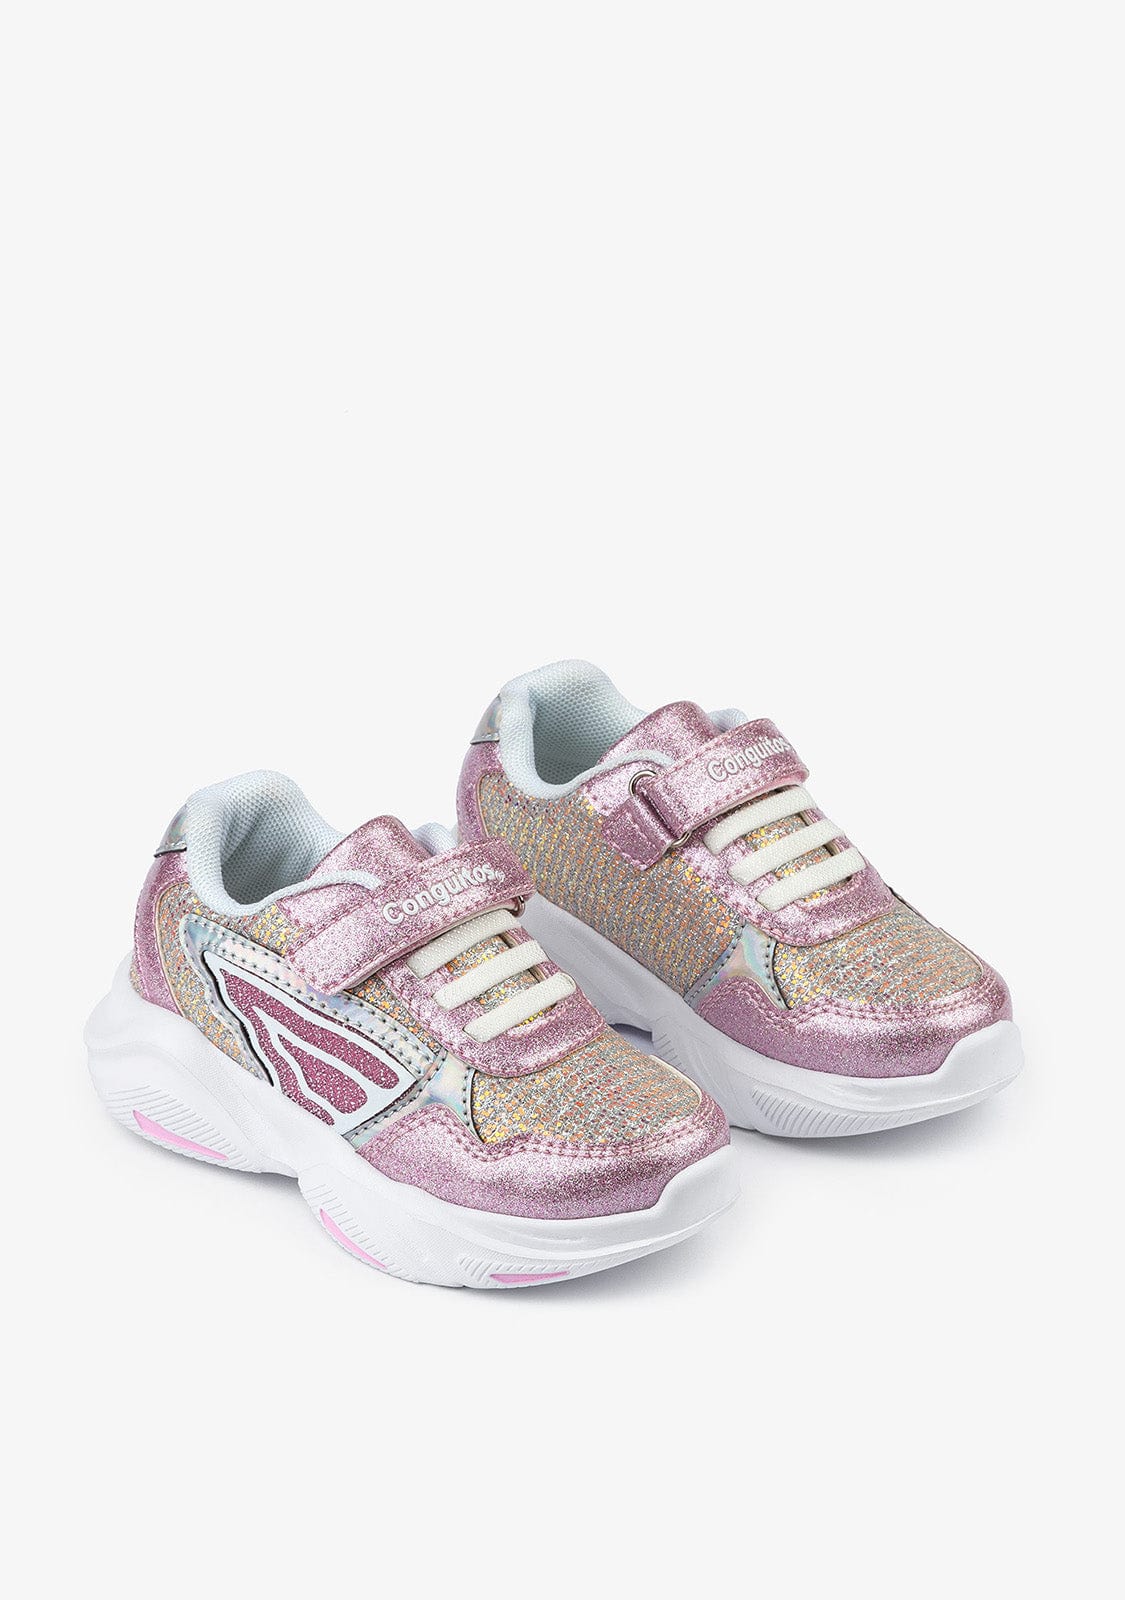 CONGUITOS Shoes Girl's Pink With Lights Sneakers Glitter